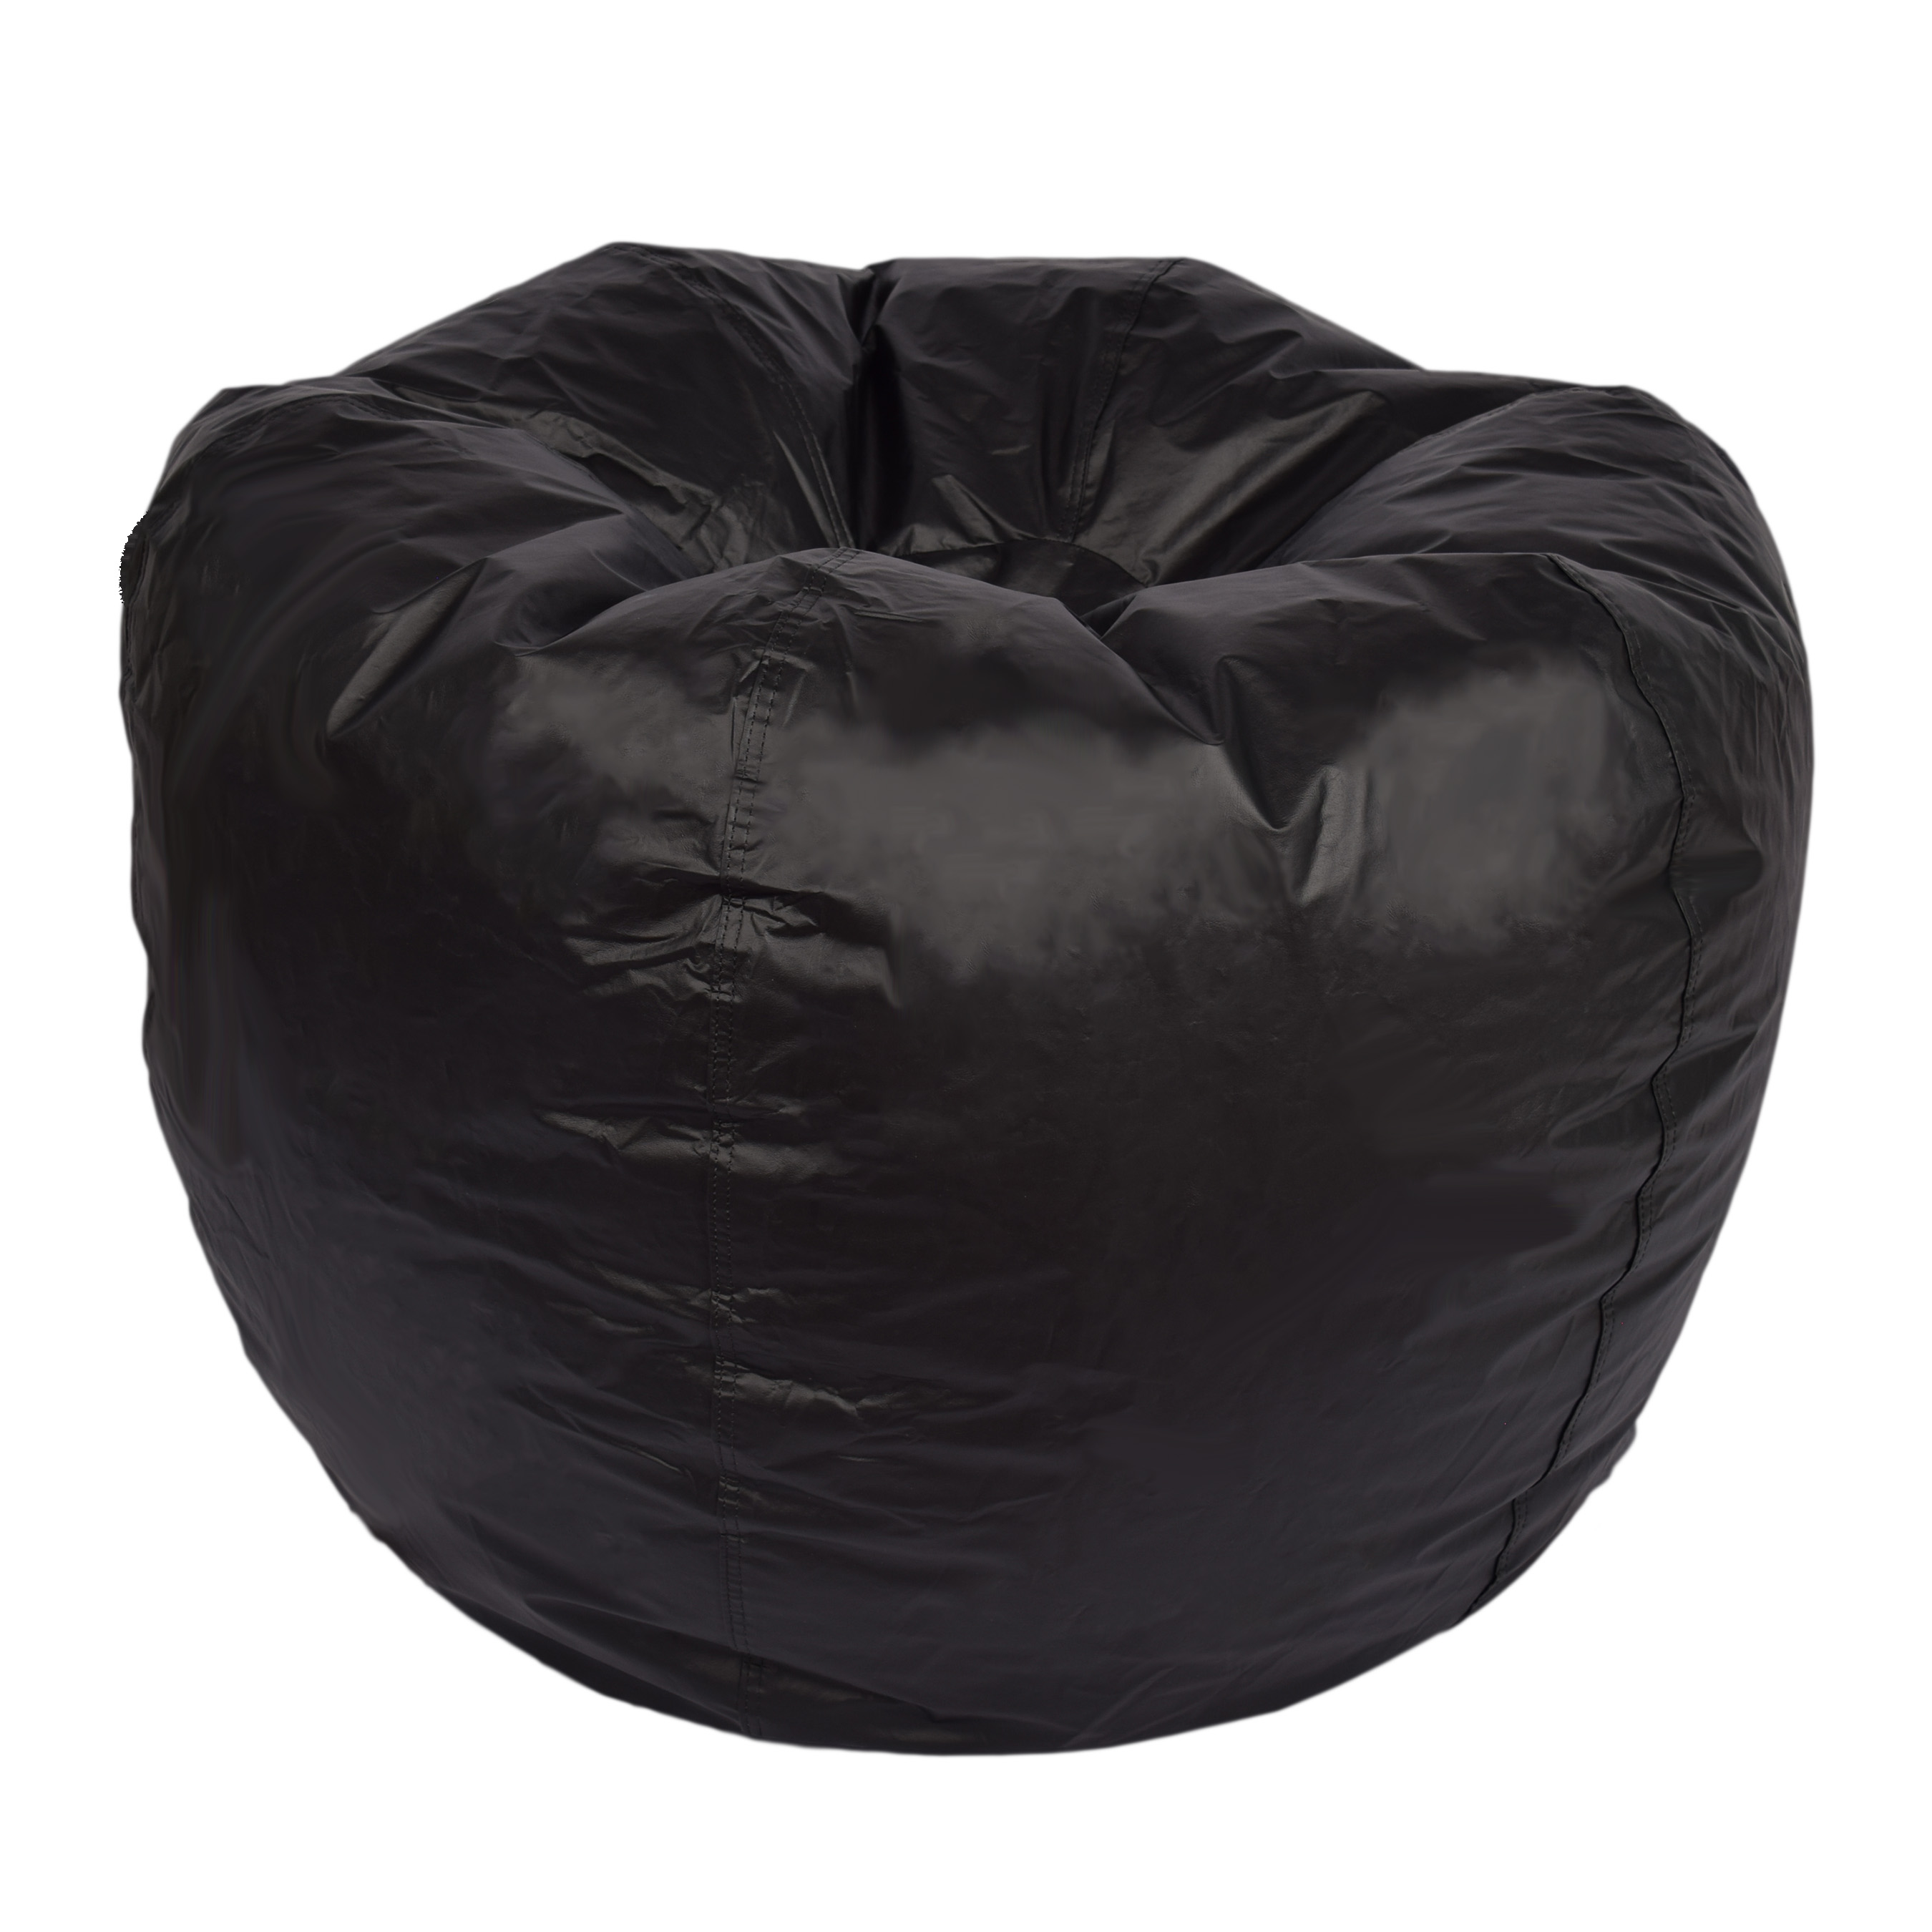 ACEssentials132" Round Extra Large Shiny Bean Bag, Multiple Colors - image 1 of 4